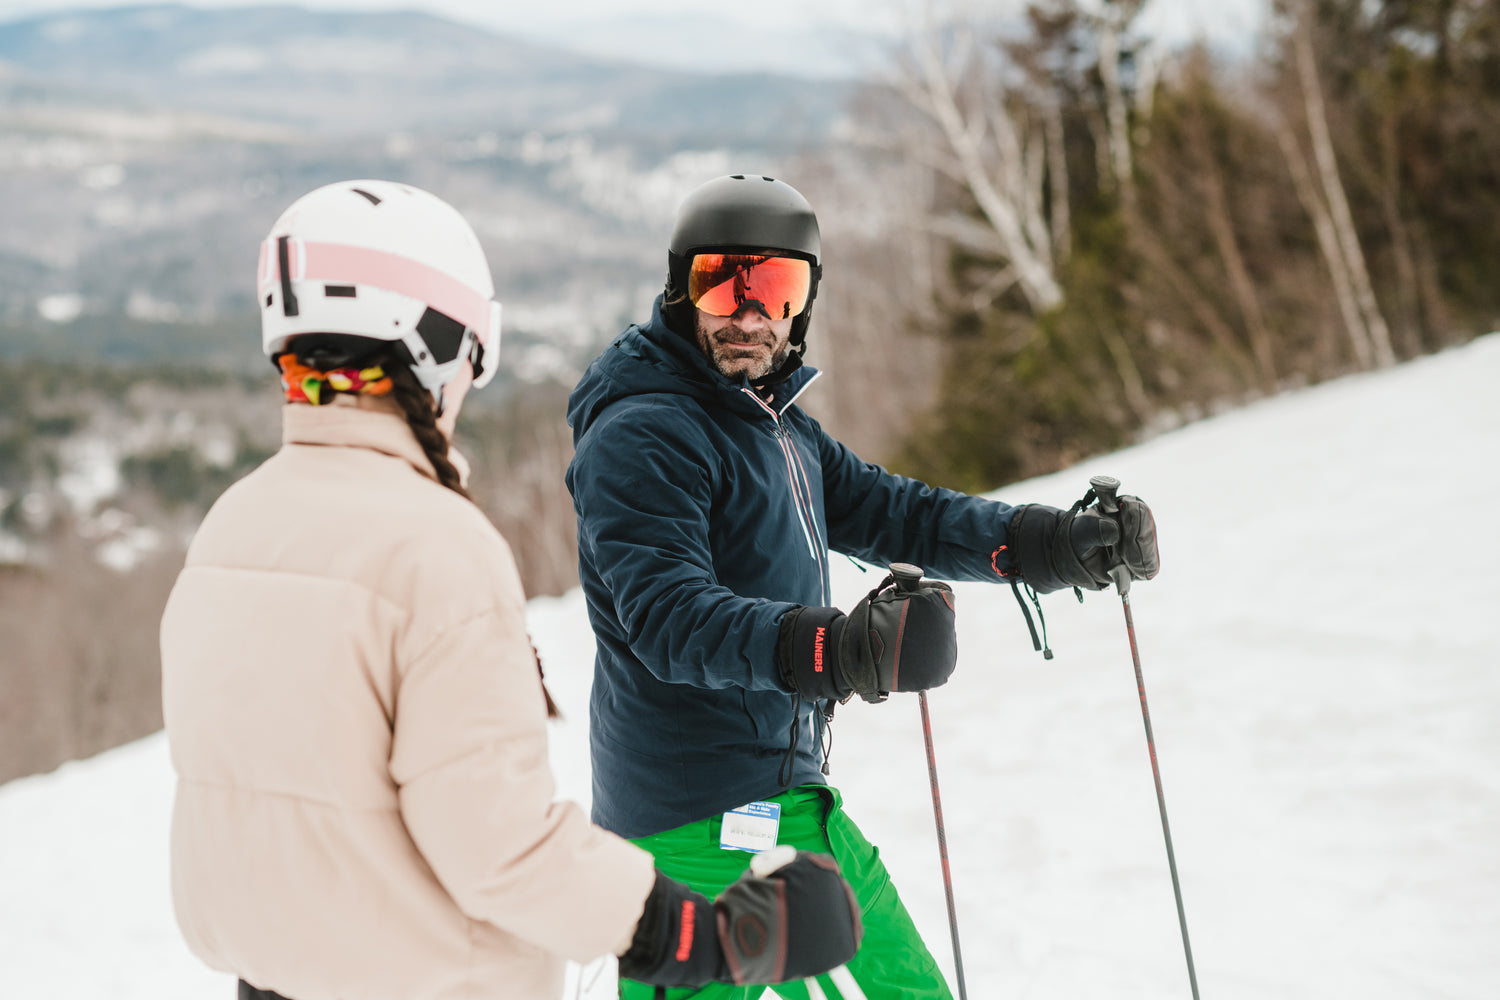 A man and woman on skis on a snowy slope.